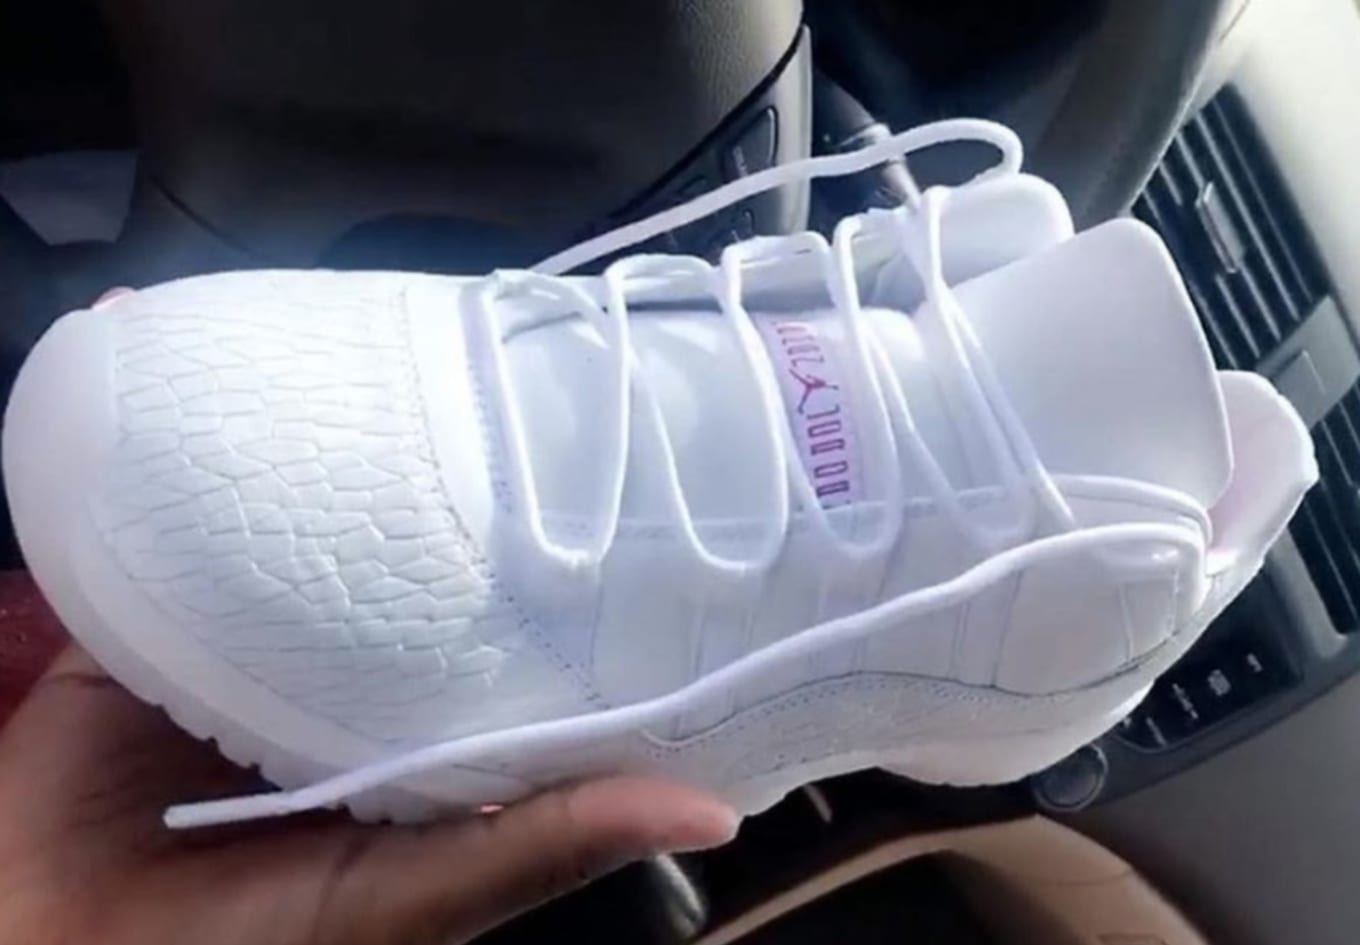 all white 11s low